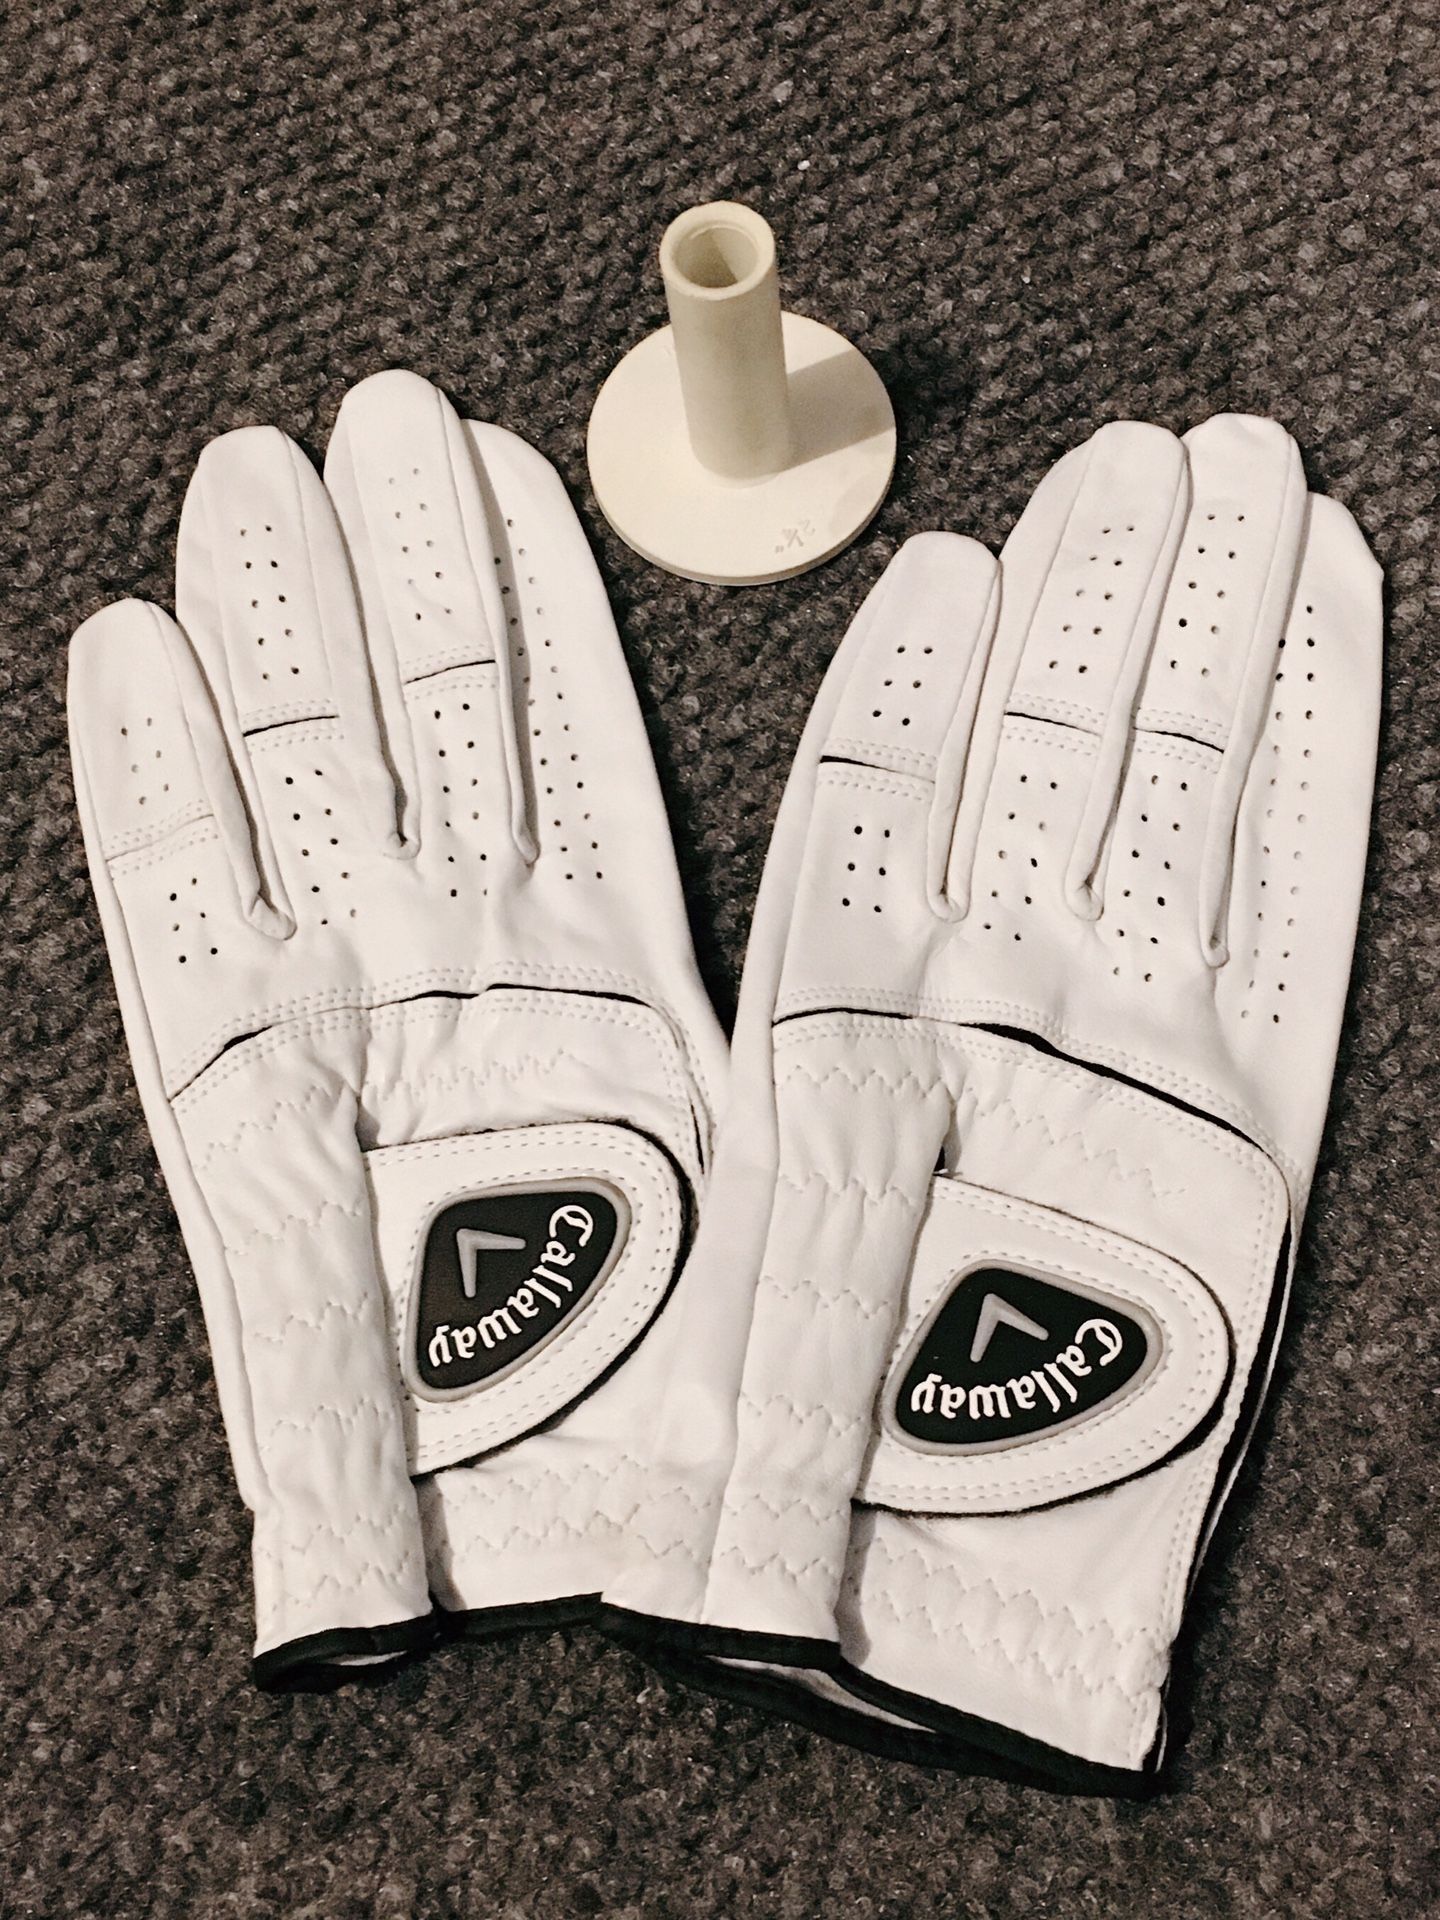 Golf gloves and rubber tee